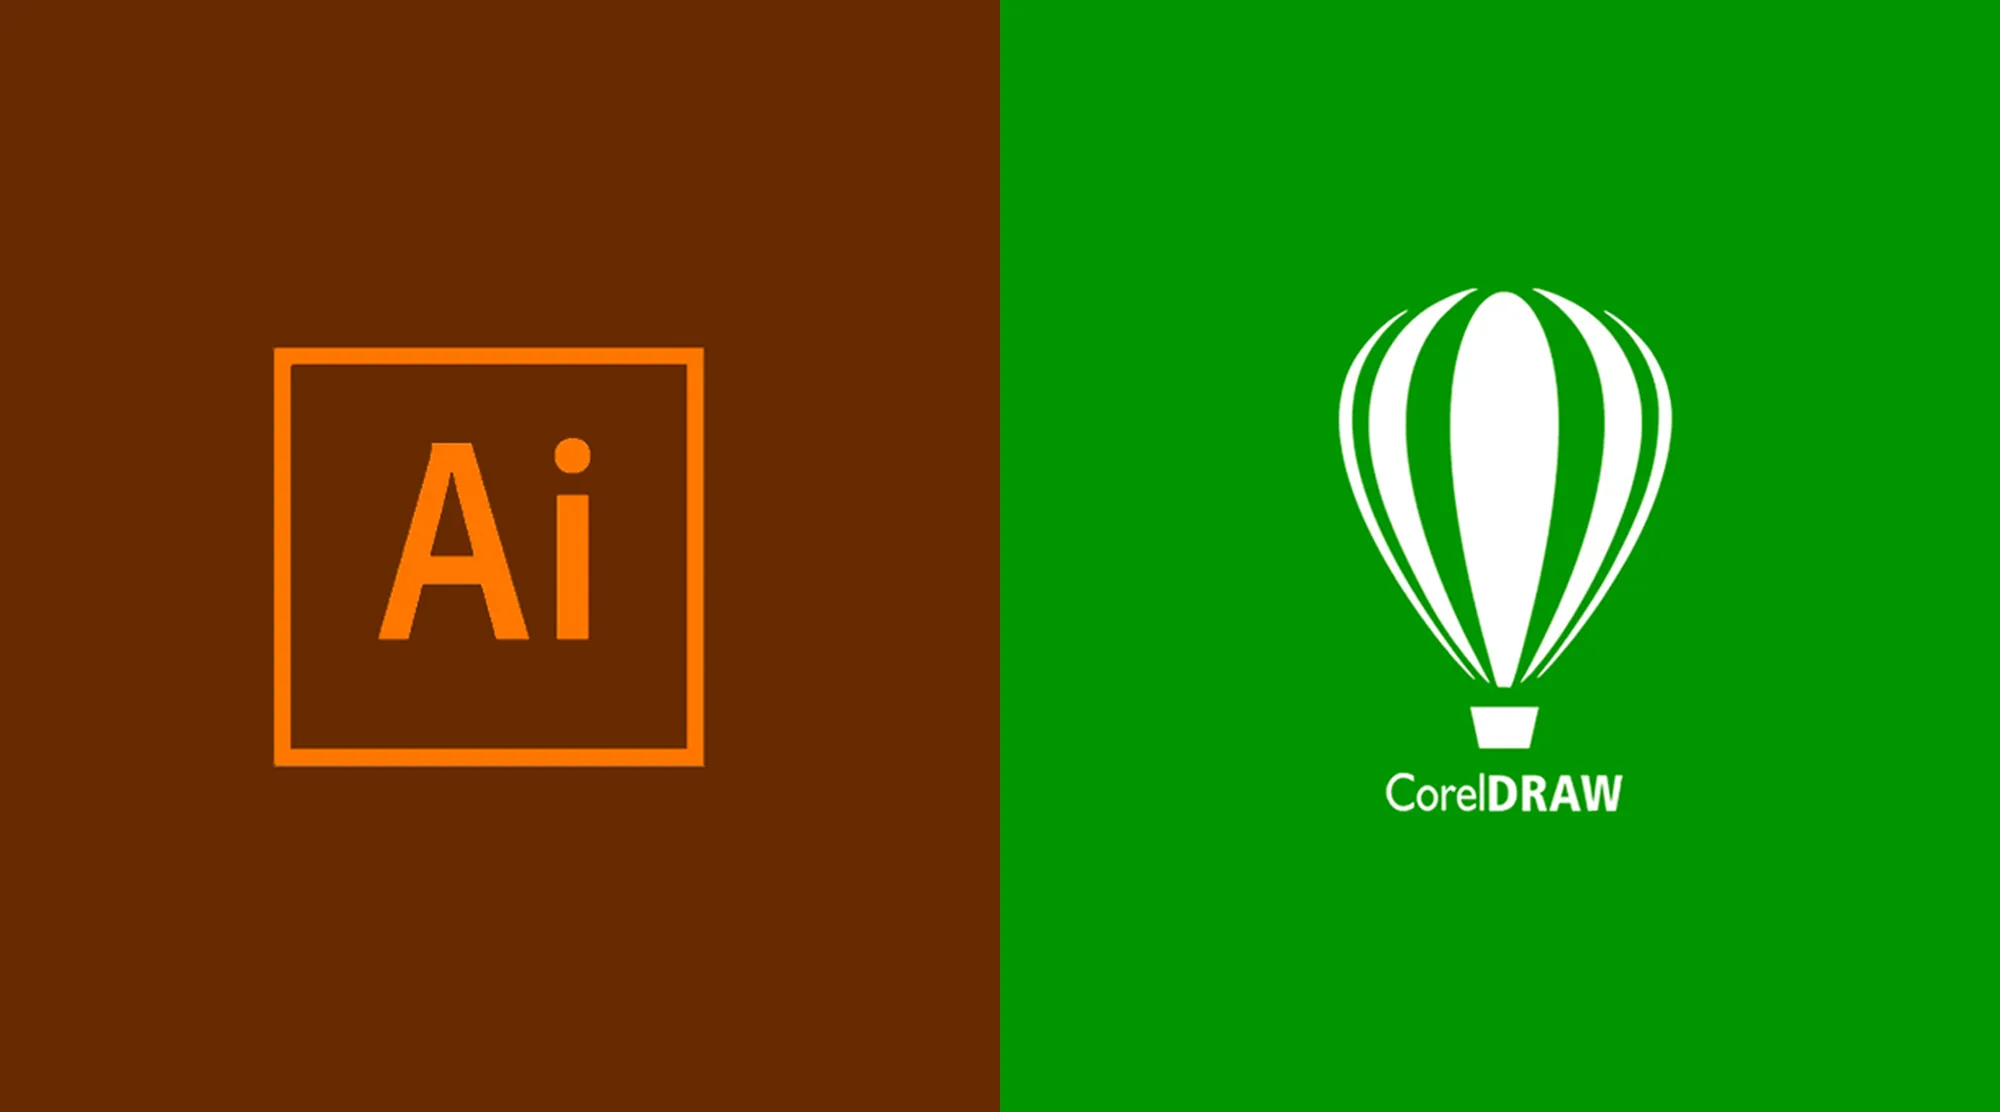 Compatibility EasySIGN with CorelDRAW and Adobe Illustrator